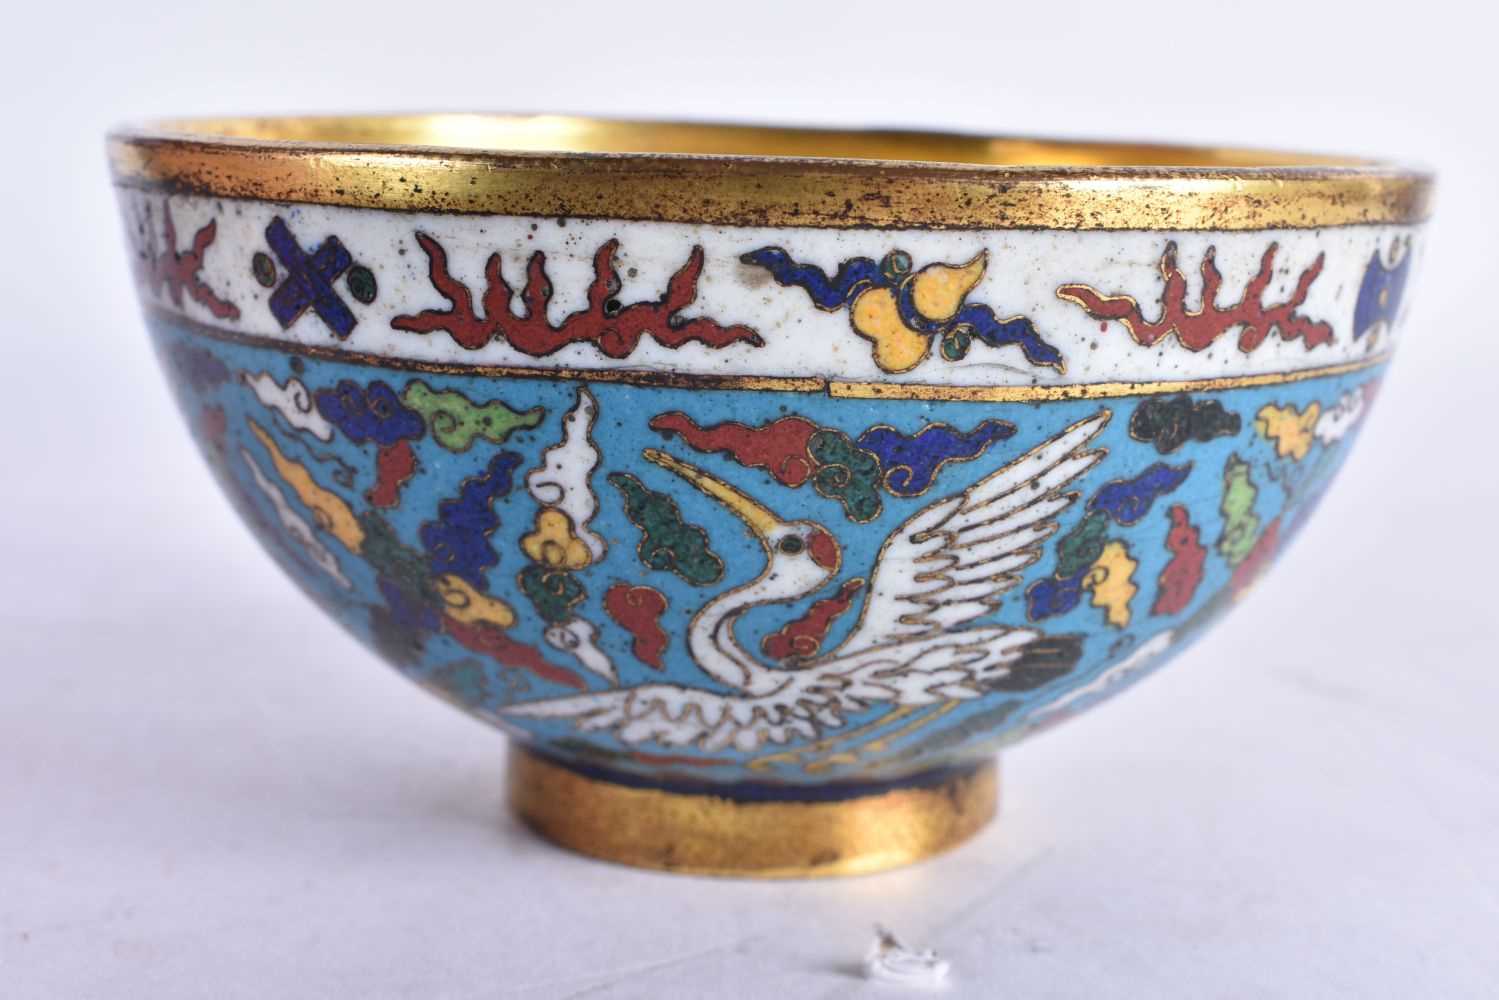 A FINE PAIR OF CLOISONNE ENAMEL BRONZE BOWLS Jiajing mark and probably of the period, decorated on a - Image 2 of 16